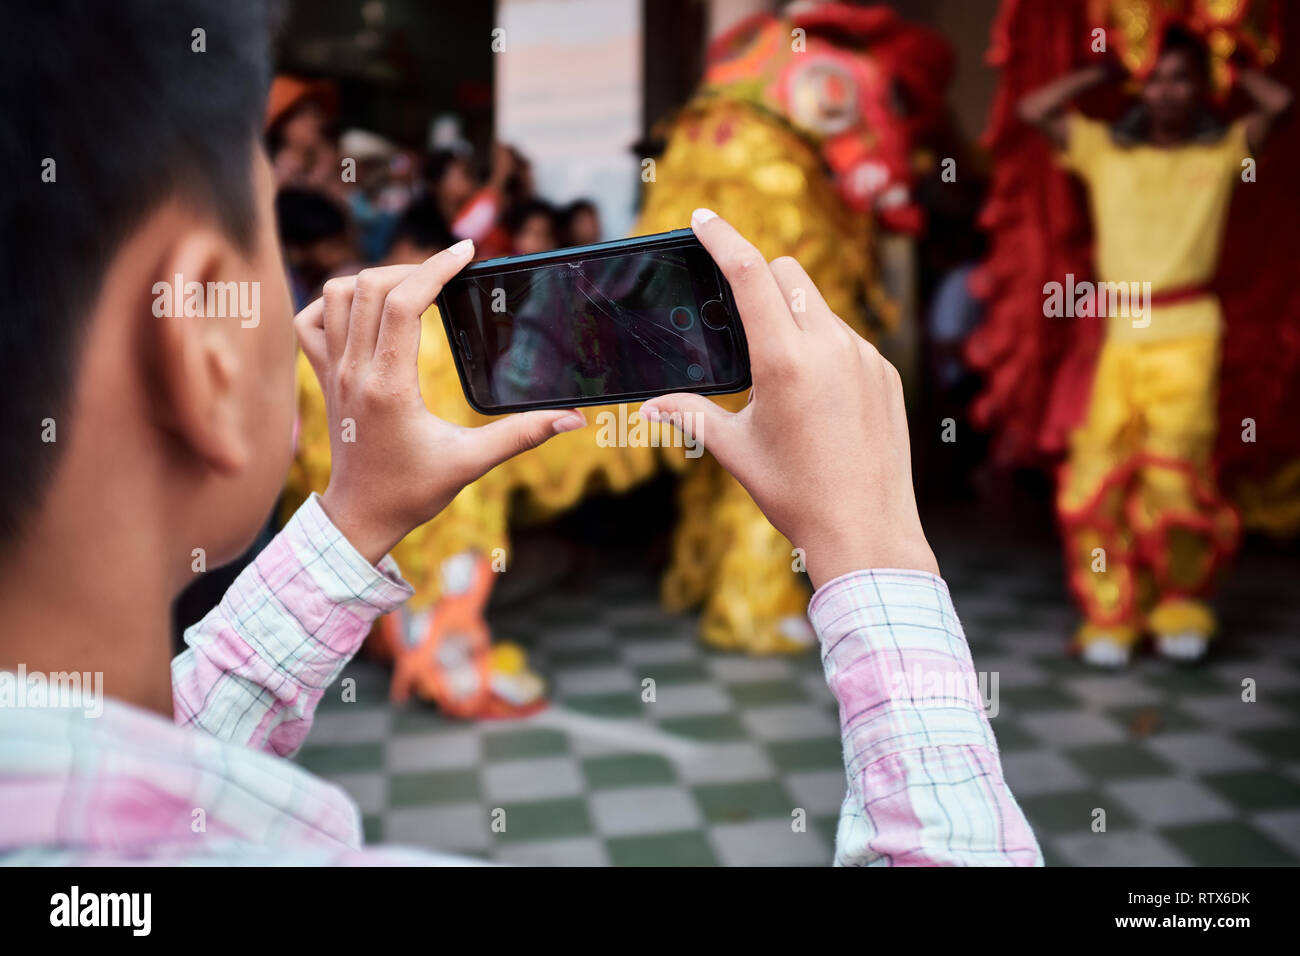 Dragon dancers usher in the new year by performing a dance ritual outside local businesses in celebration of the Chinese New Year Stock Photo